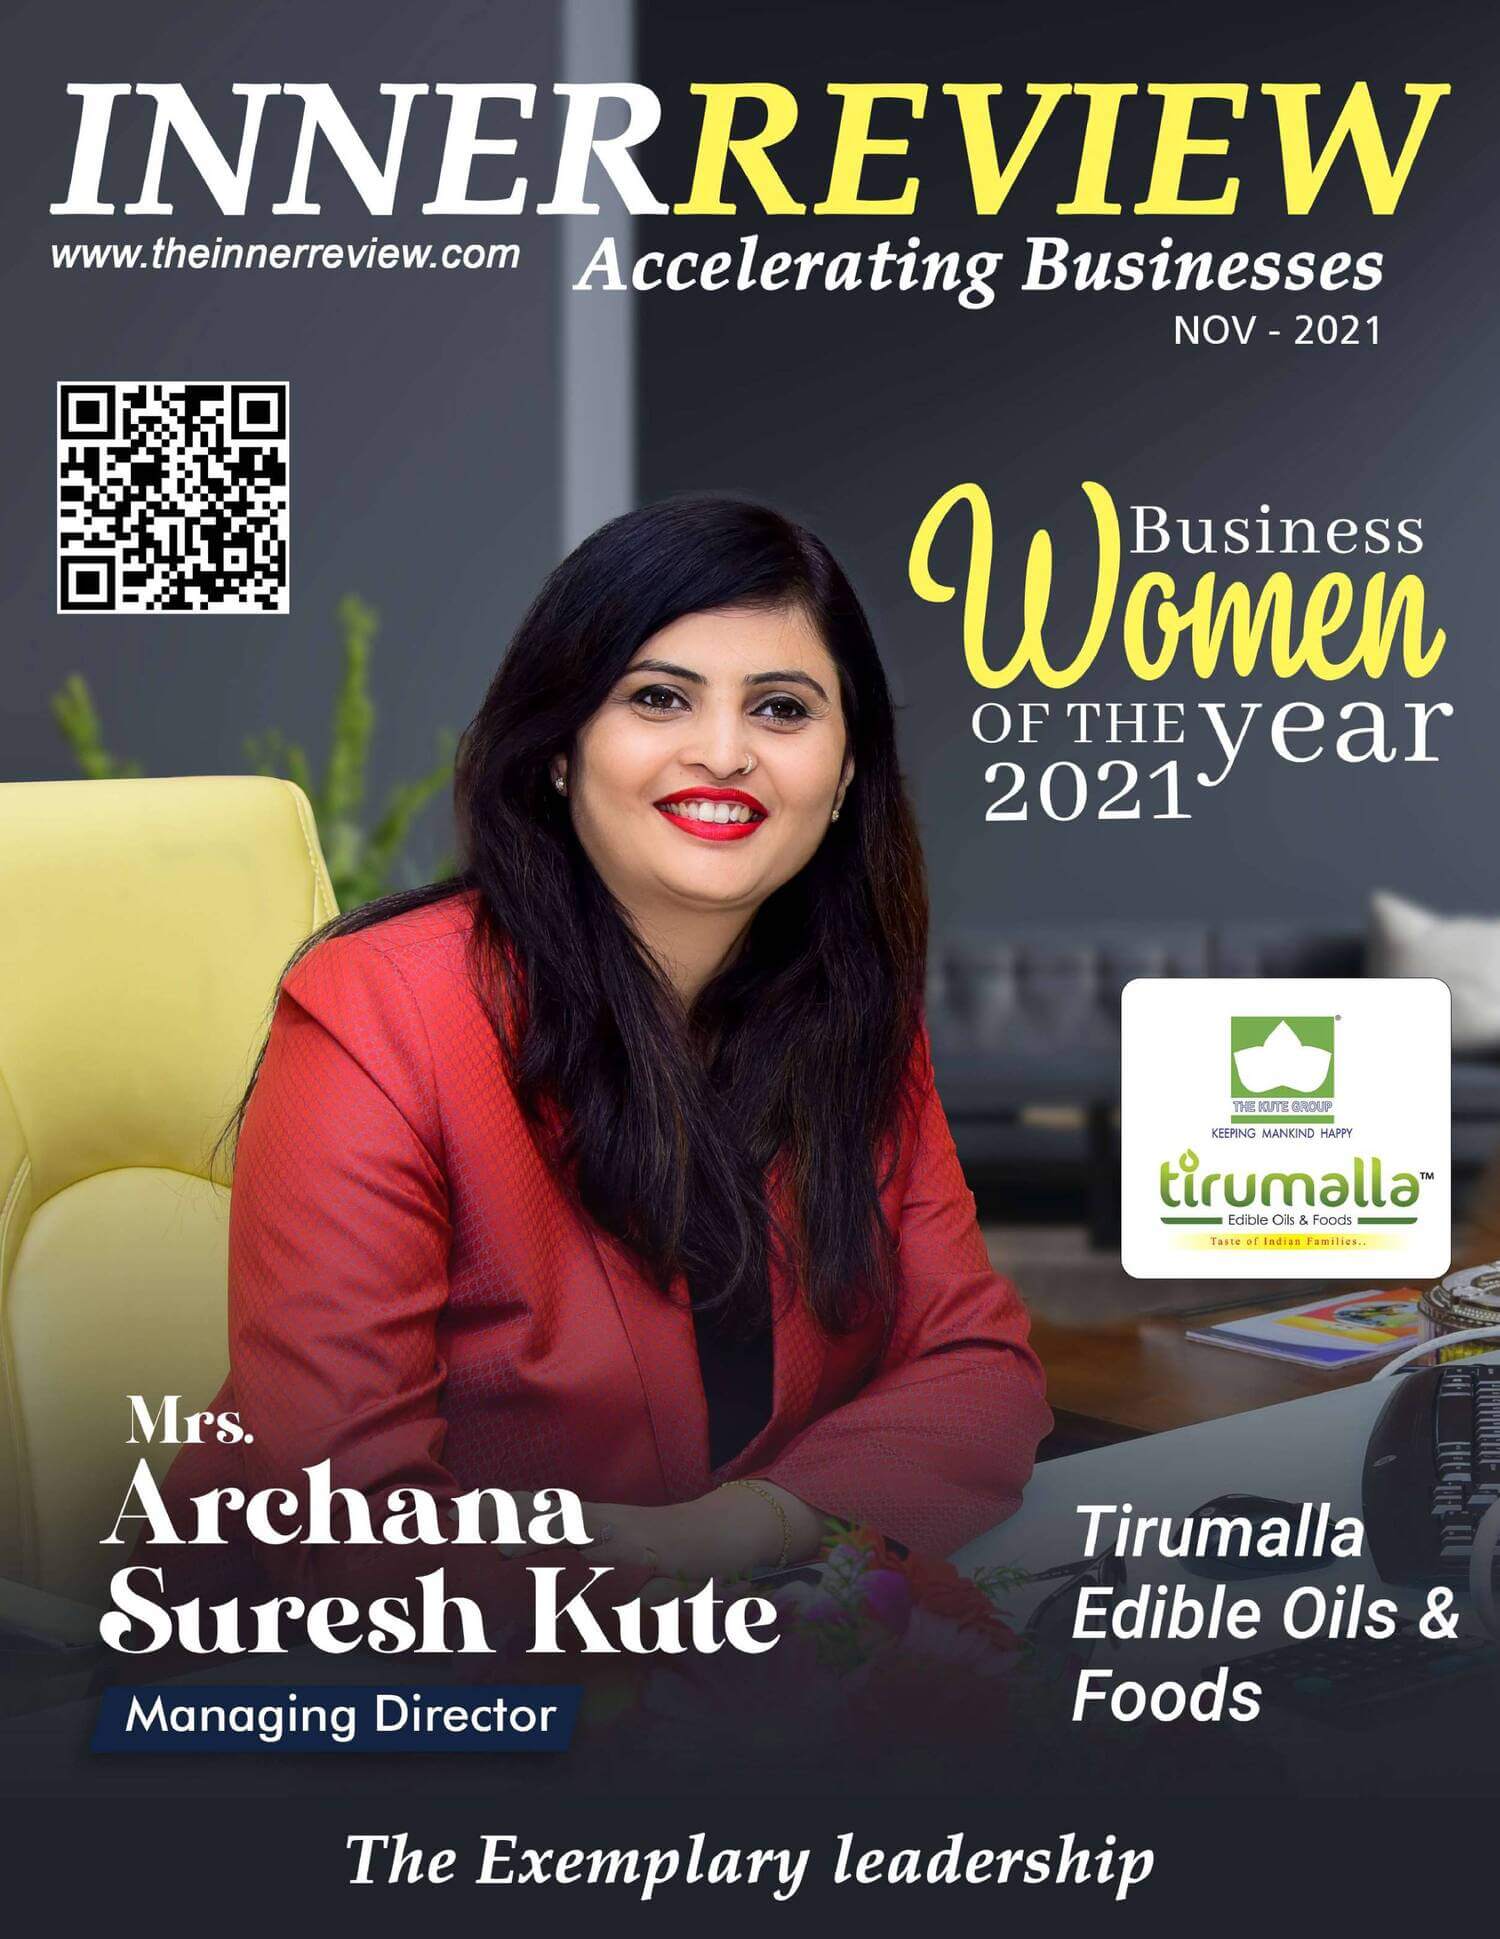 1_Archana-Kute-featured-in-Inner-Review-2021-magazine